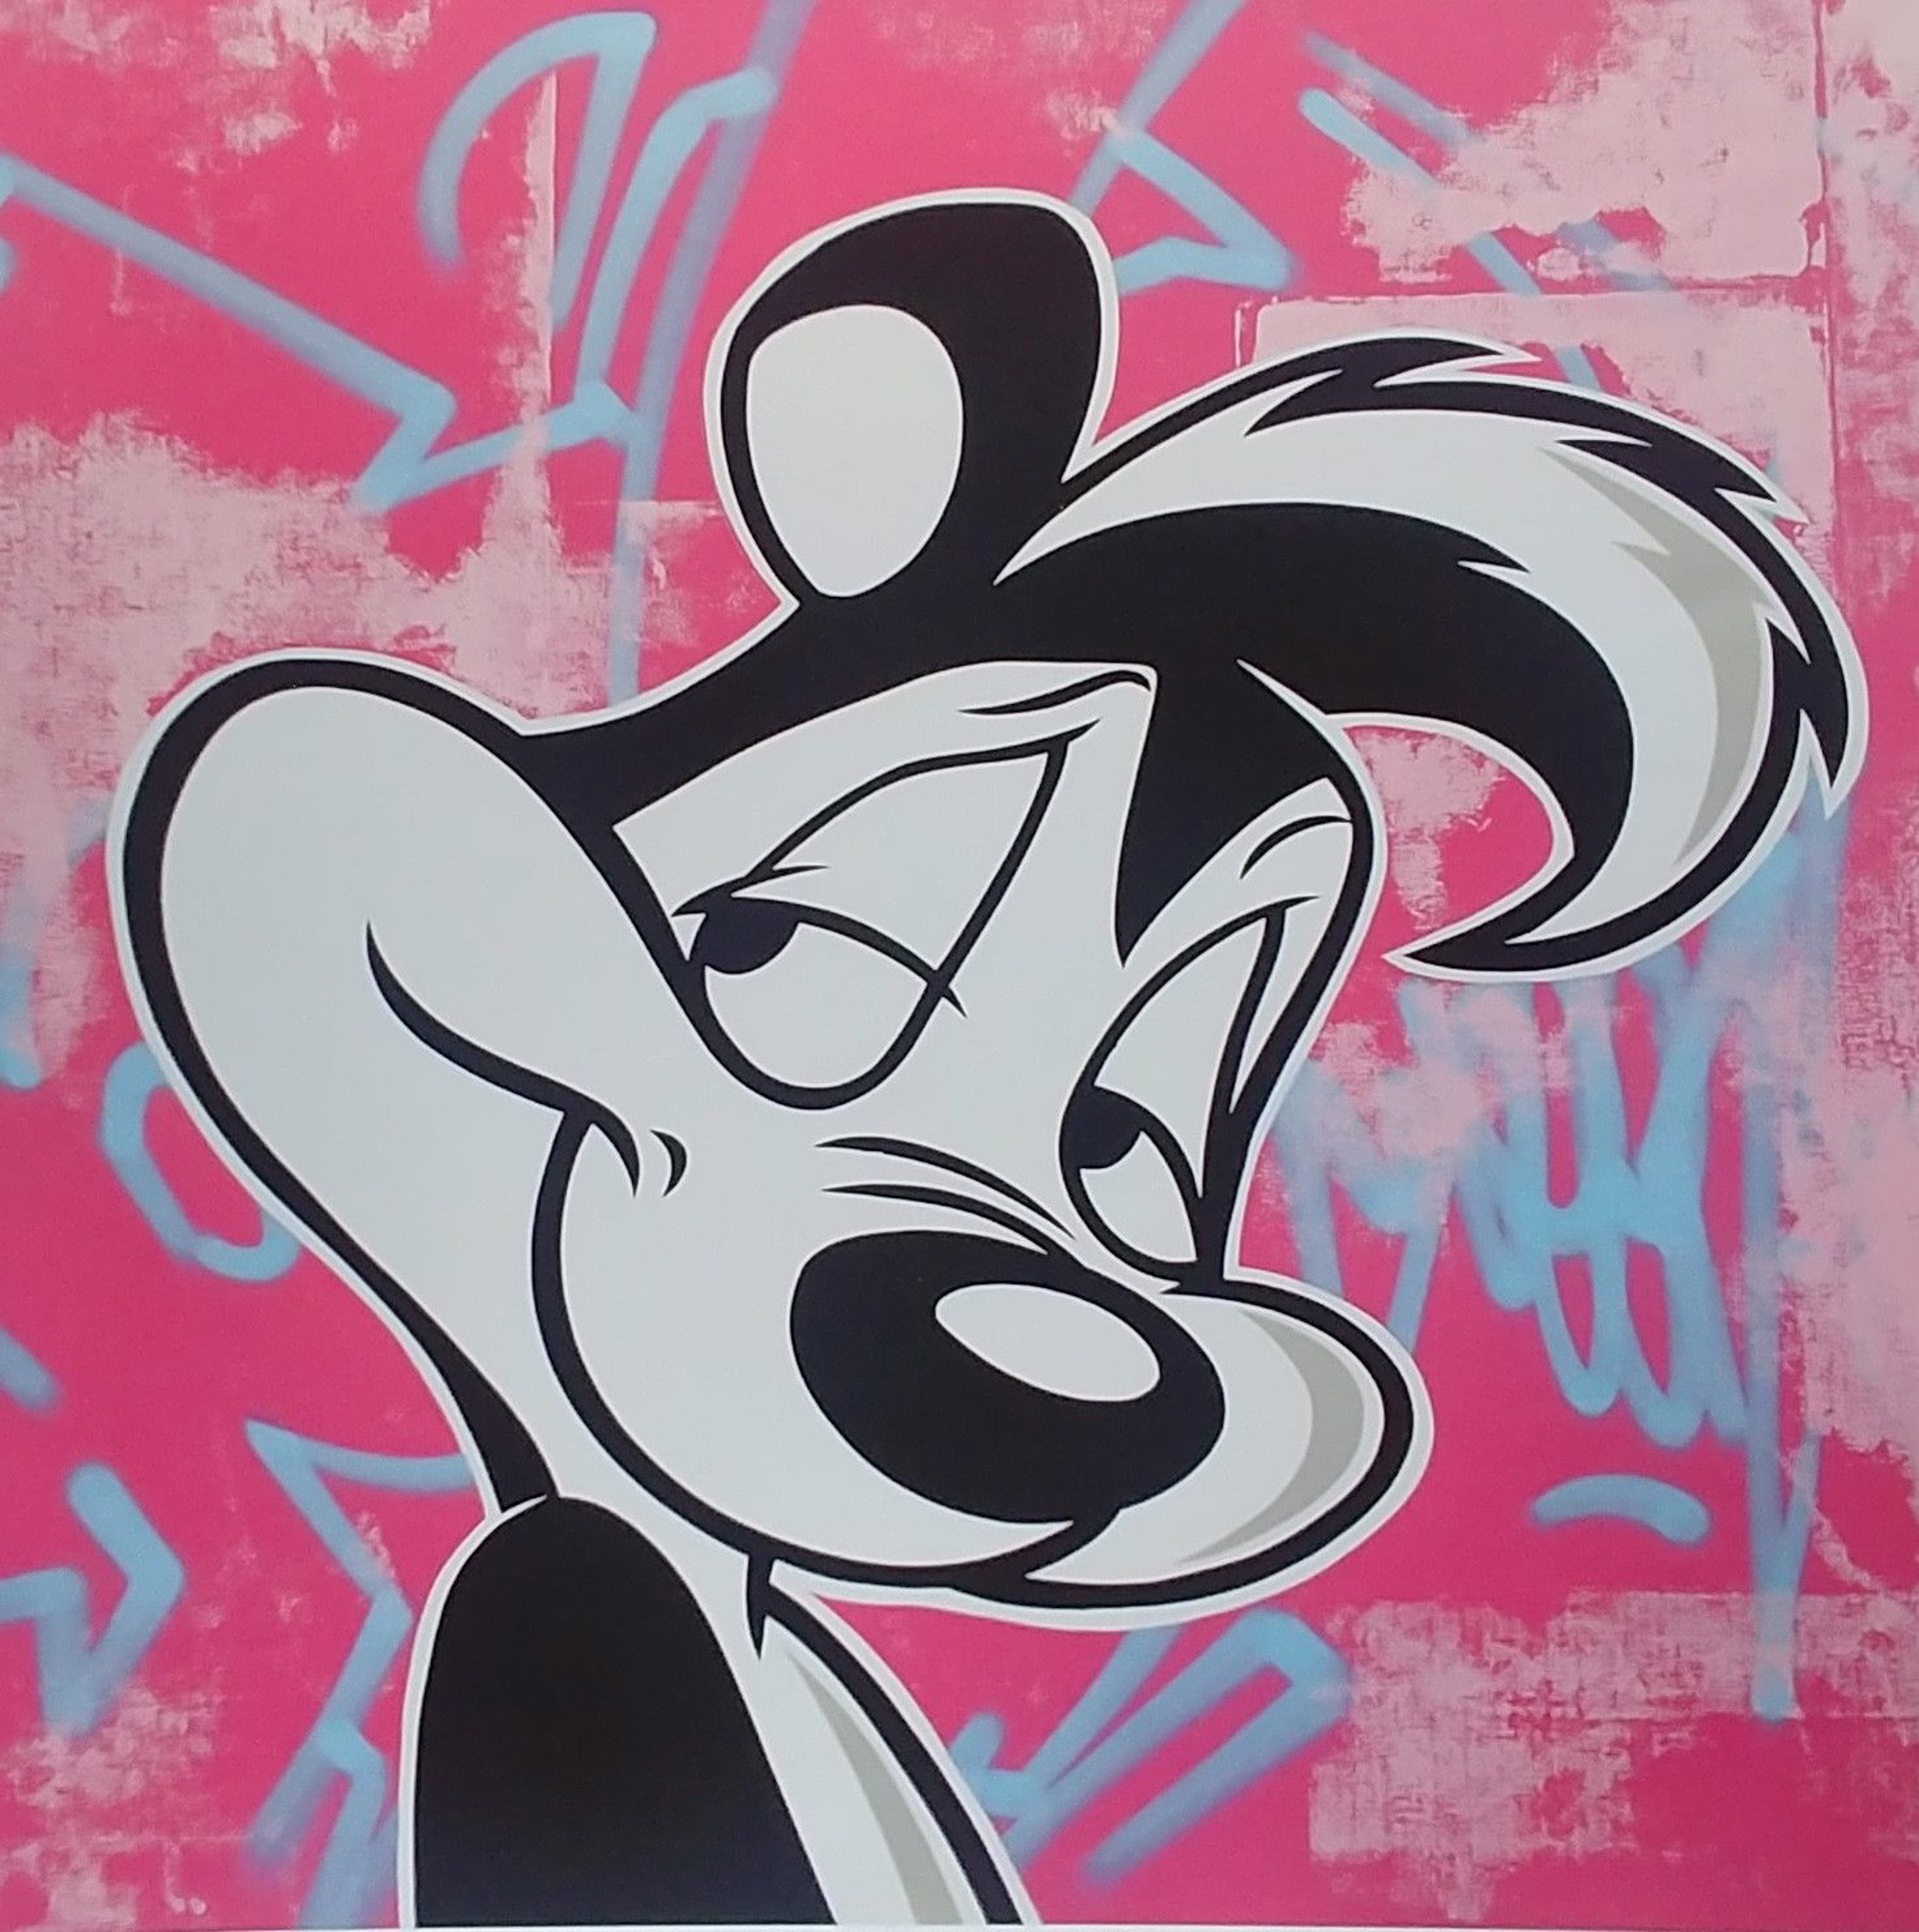 Pepe Le Pew (4/25) by Seen